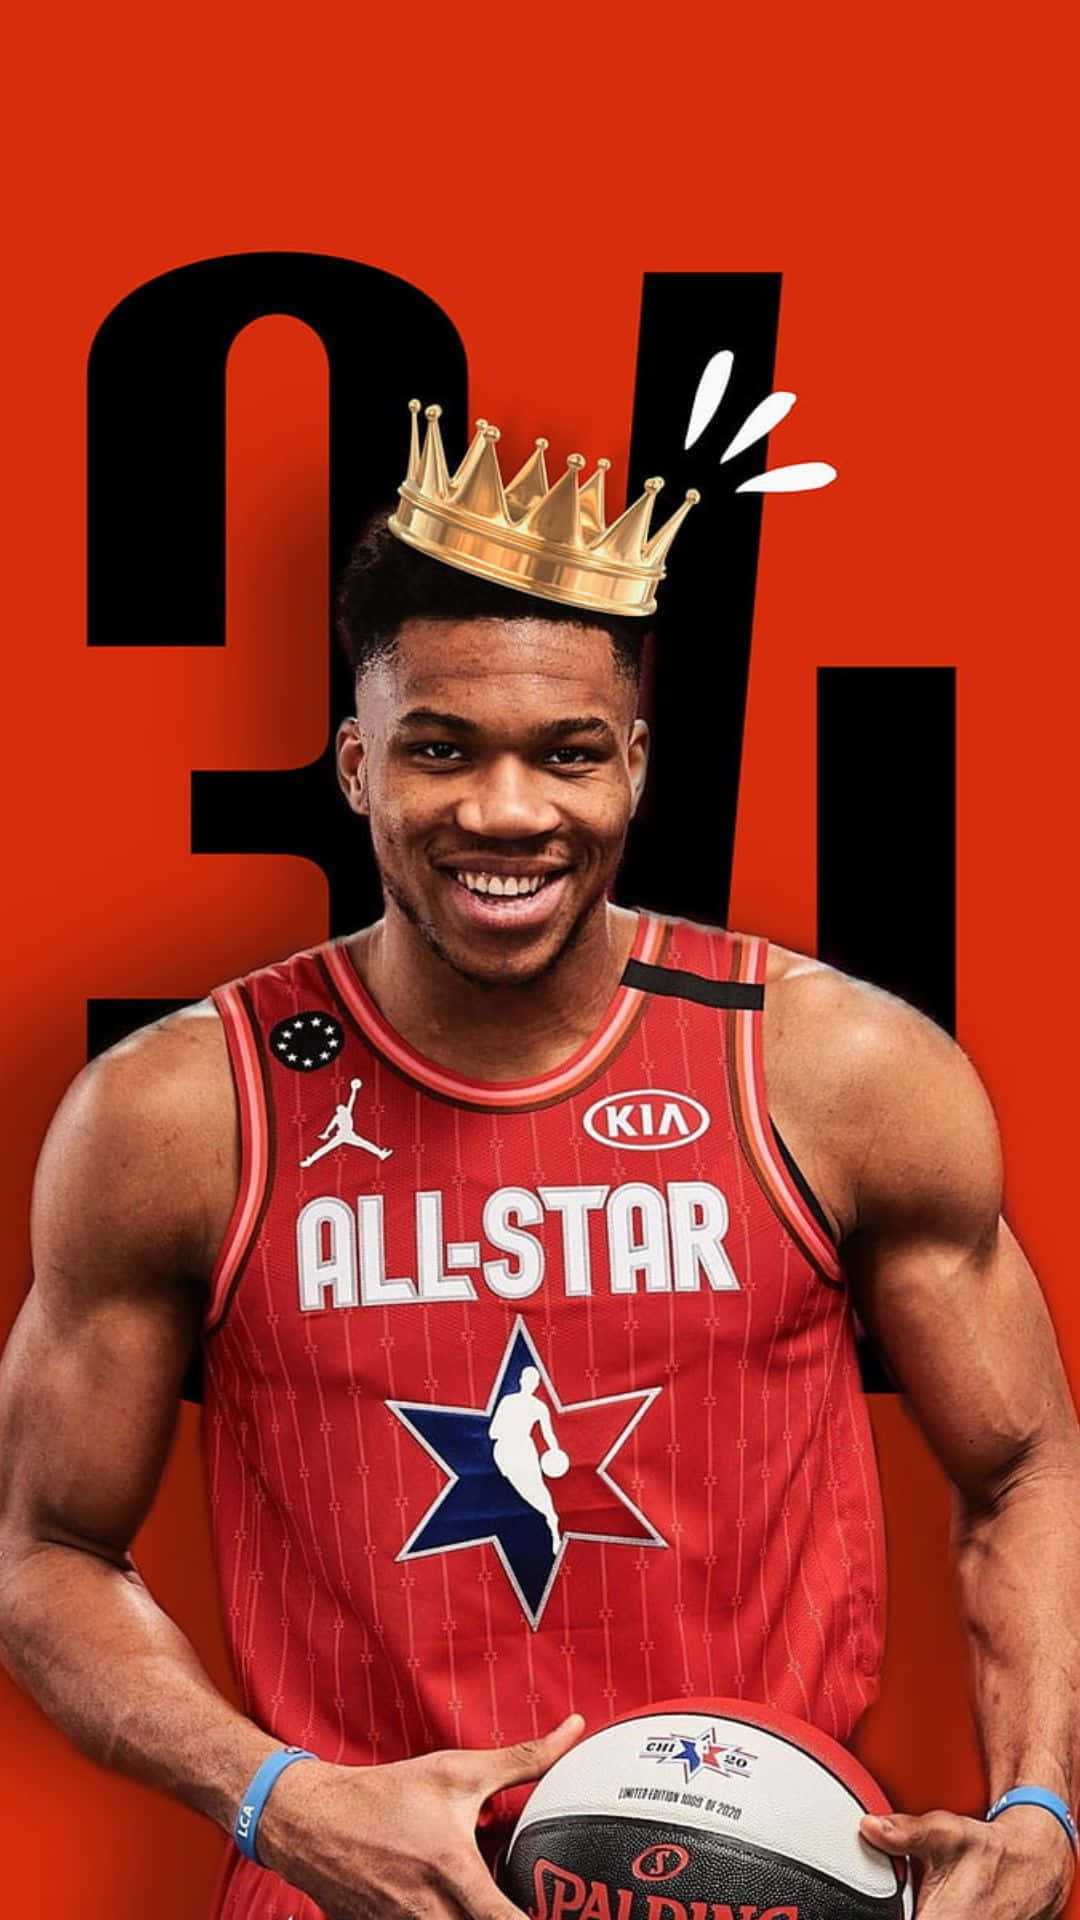 N B A All Star Player Crowned King Wallpaper